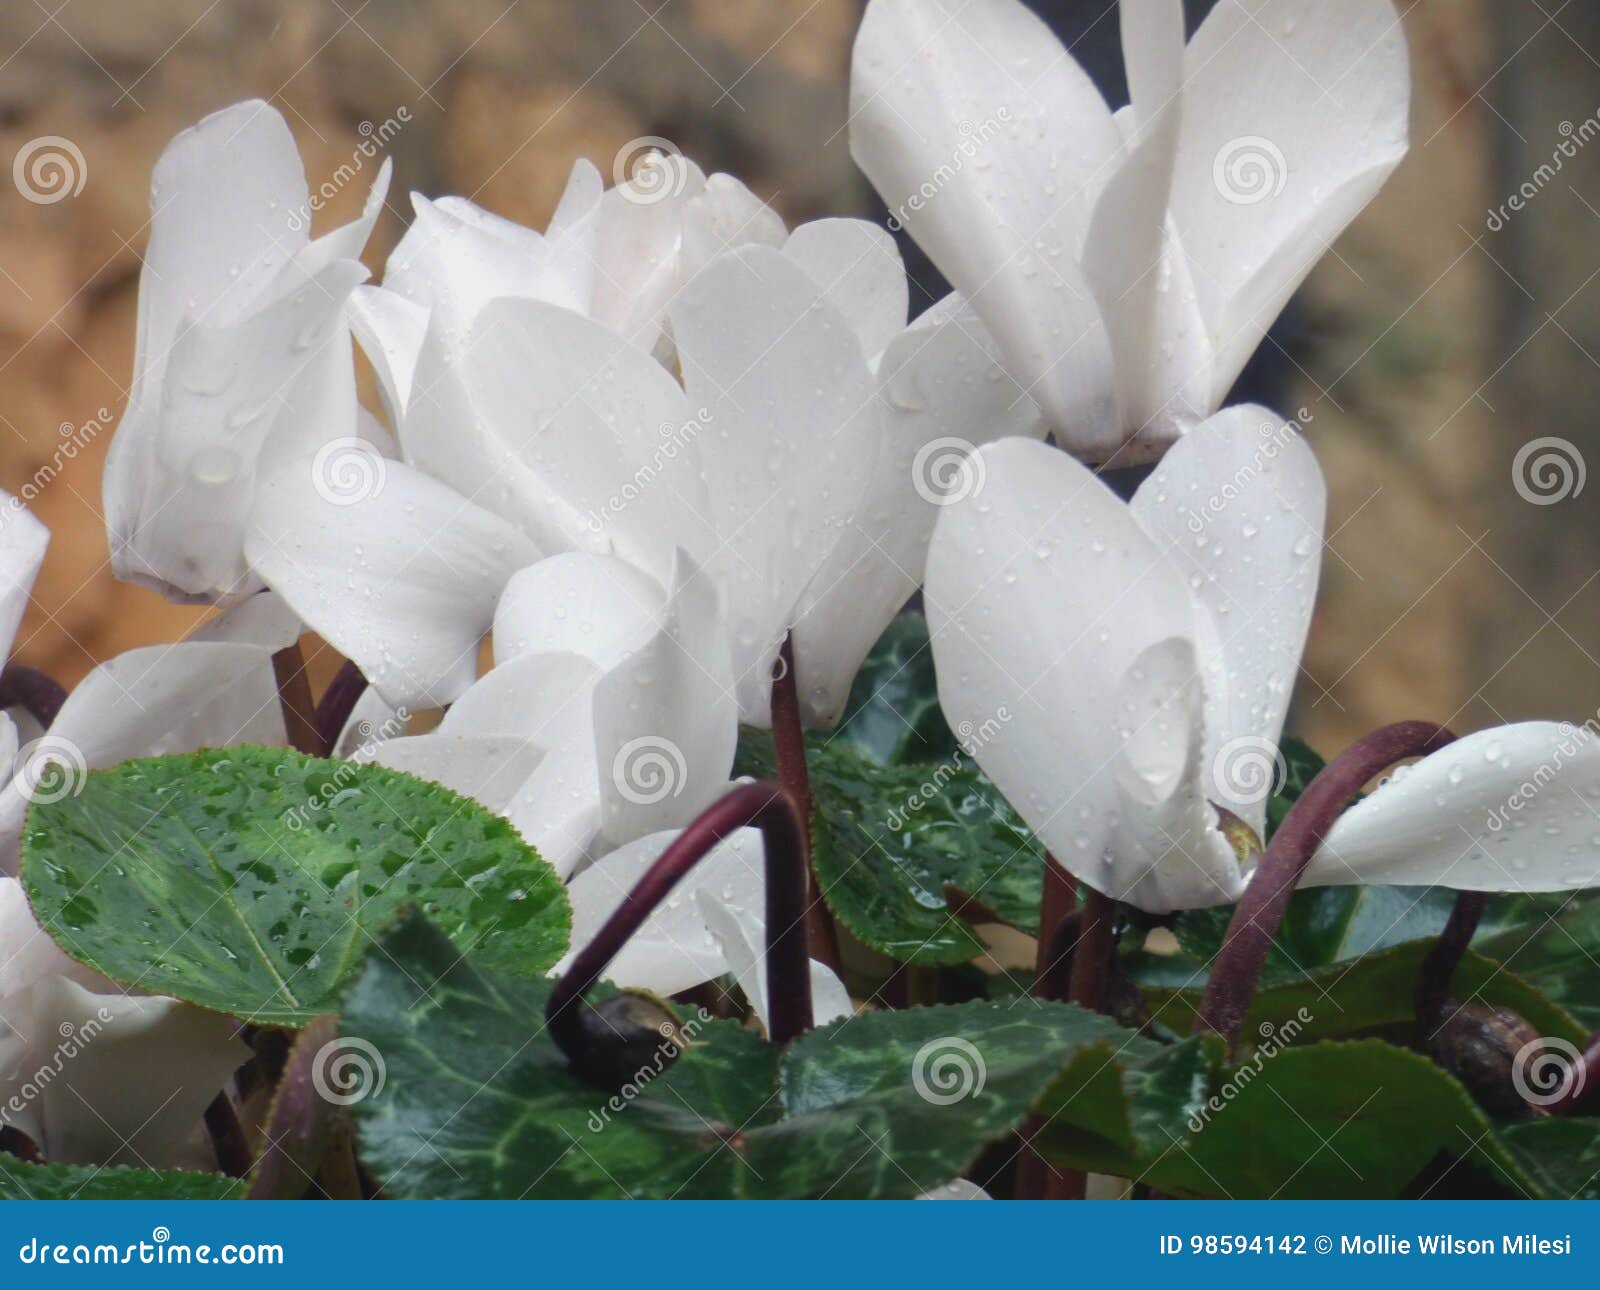 125 Cyclamen Blossoms Stock Photos - Free & Royalty-Free Stock Photos from  Dreamstime